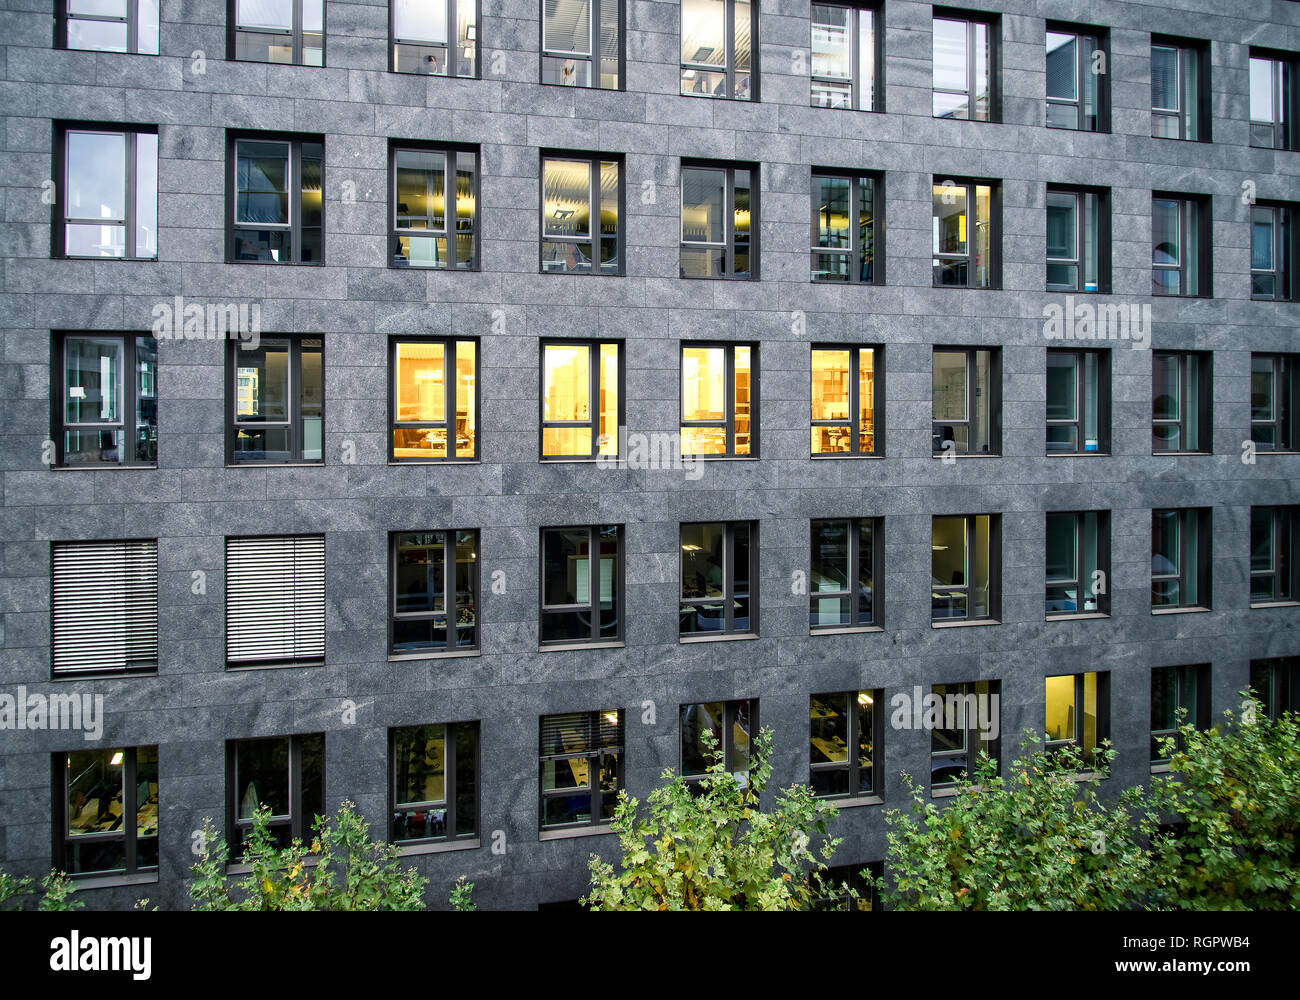 Facade of an office building with some brightly lit windows Stock Photo